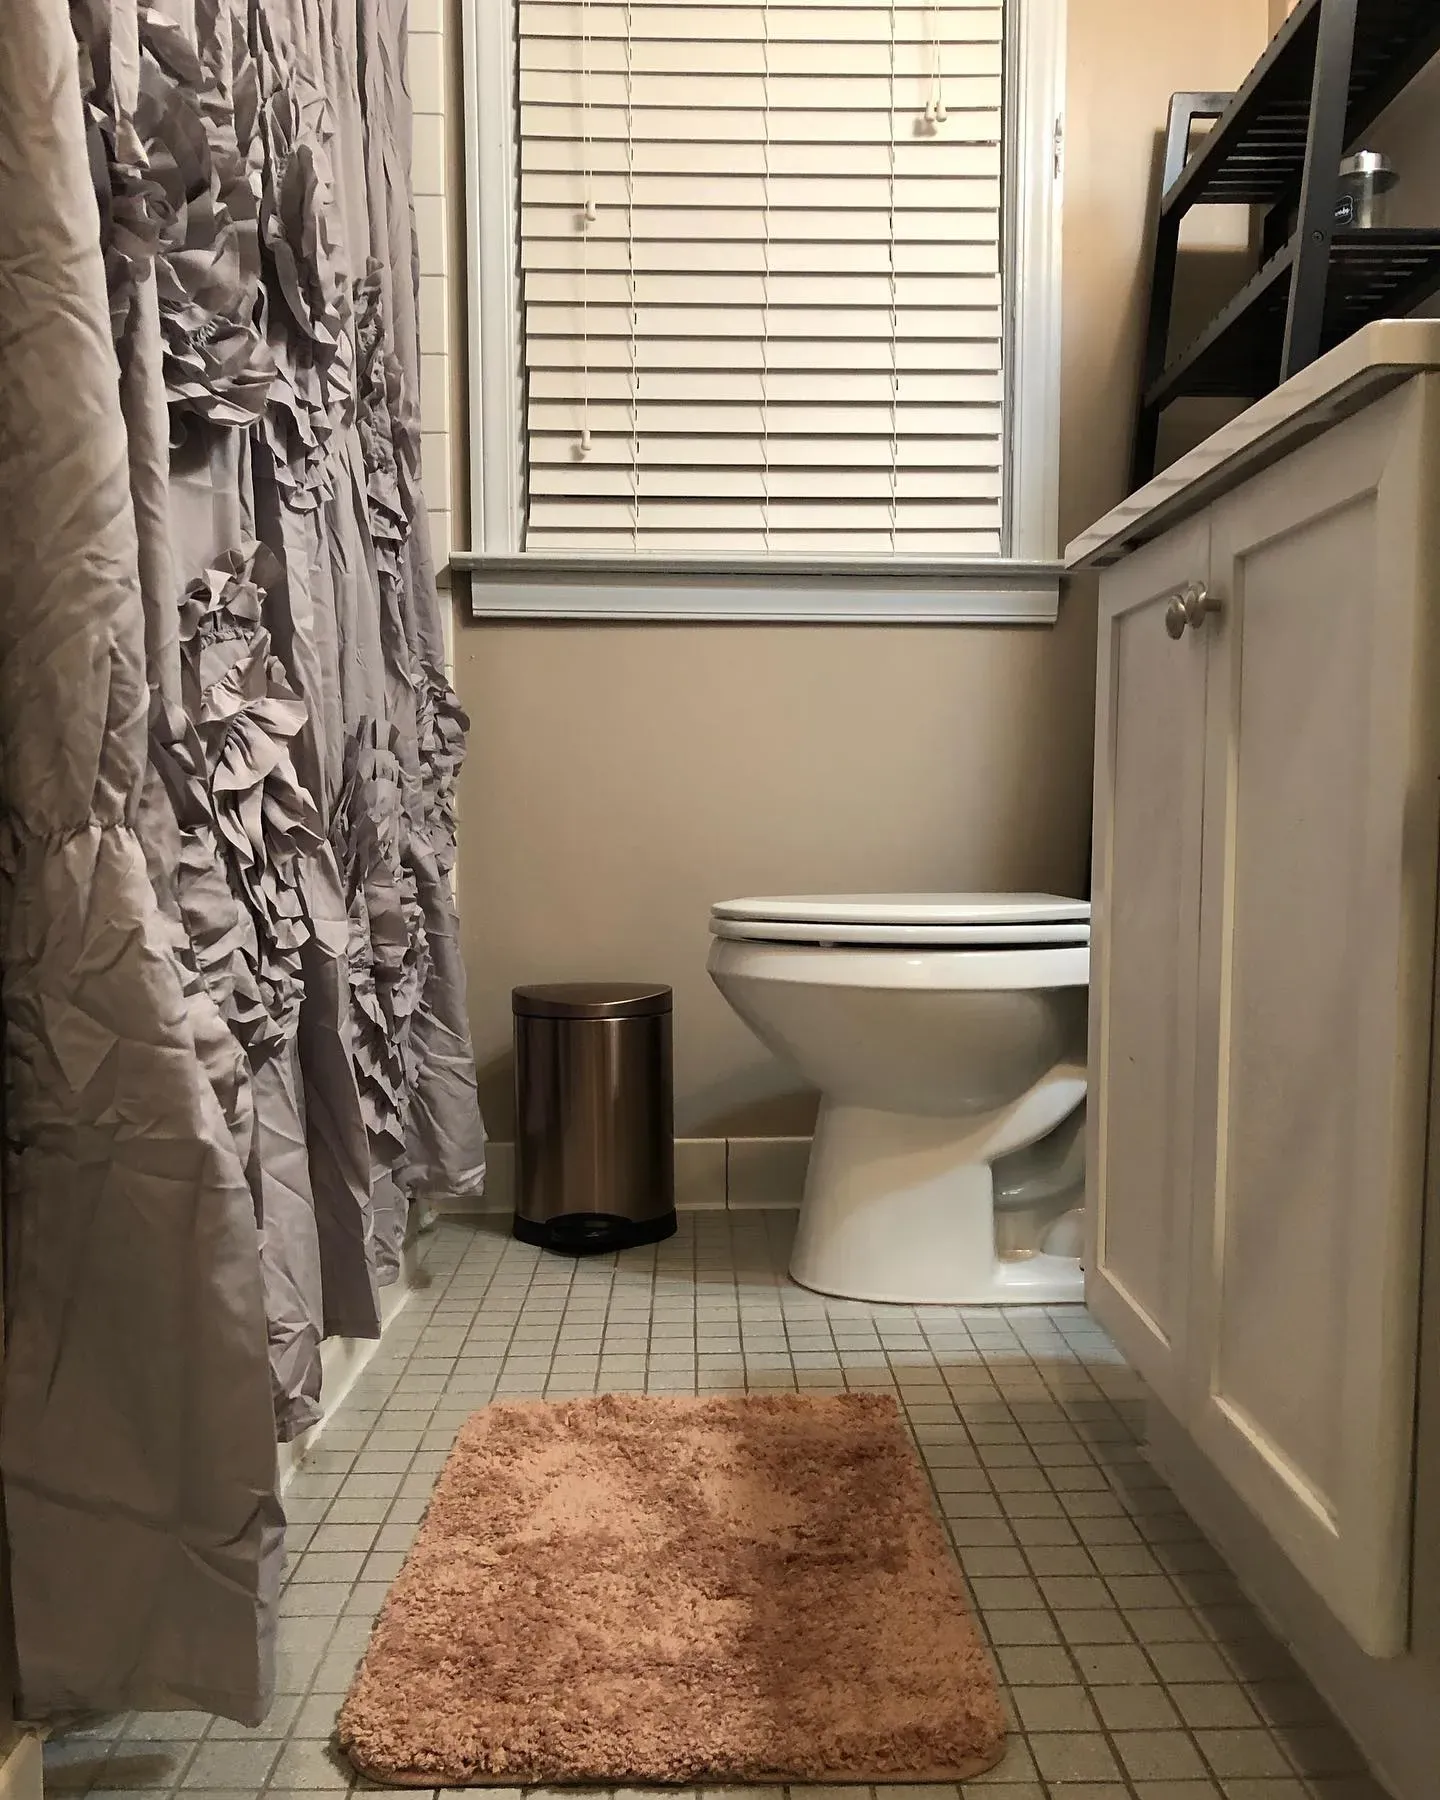 Behr Armadillo bathroom paint review